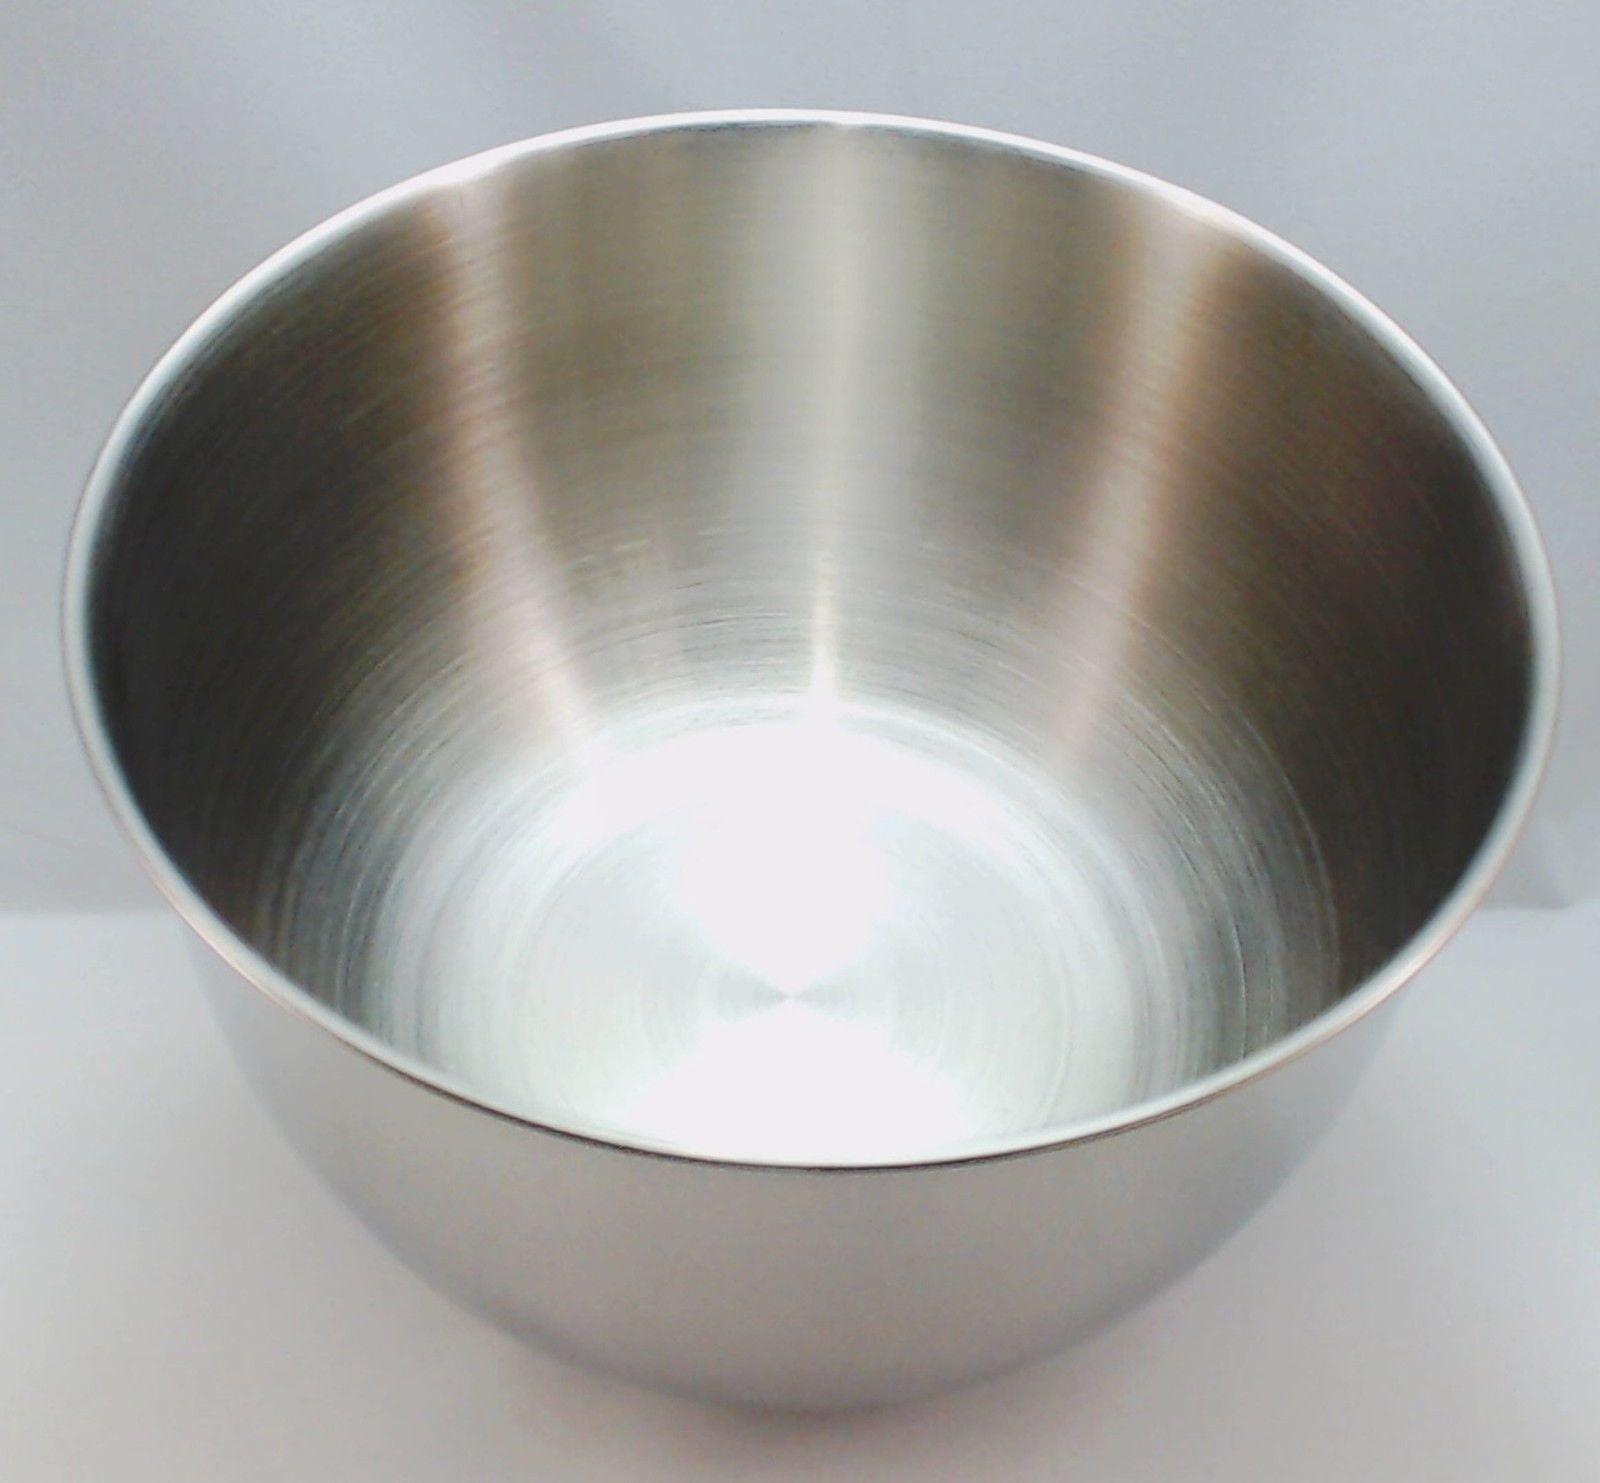 Sunbeam Oster Stainless Steel Mixer Large Bowl by Oster 